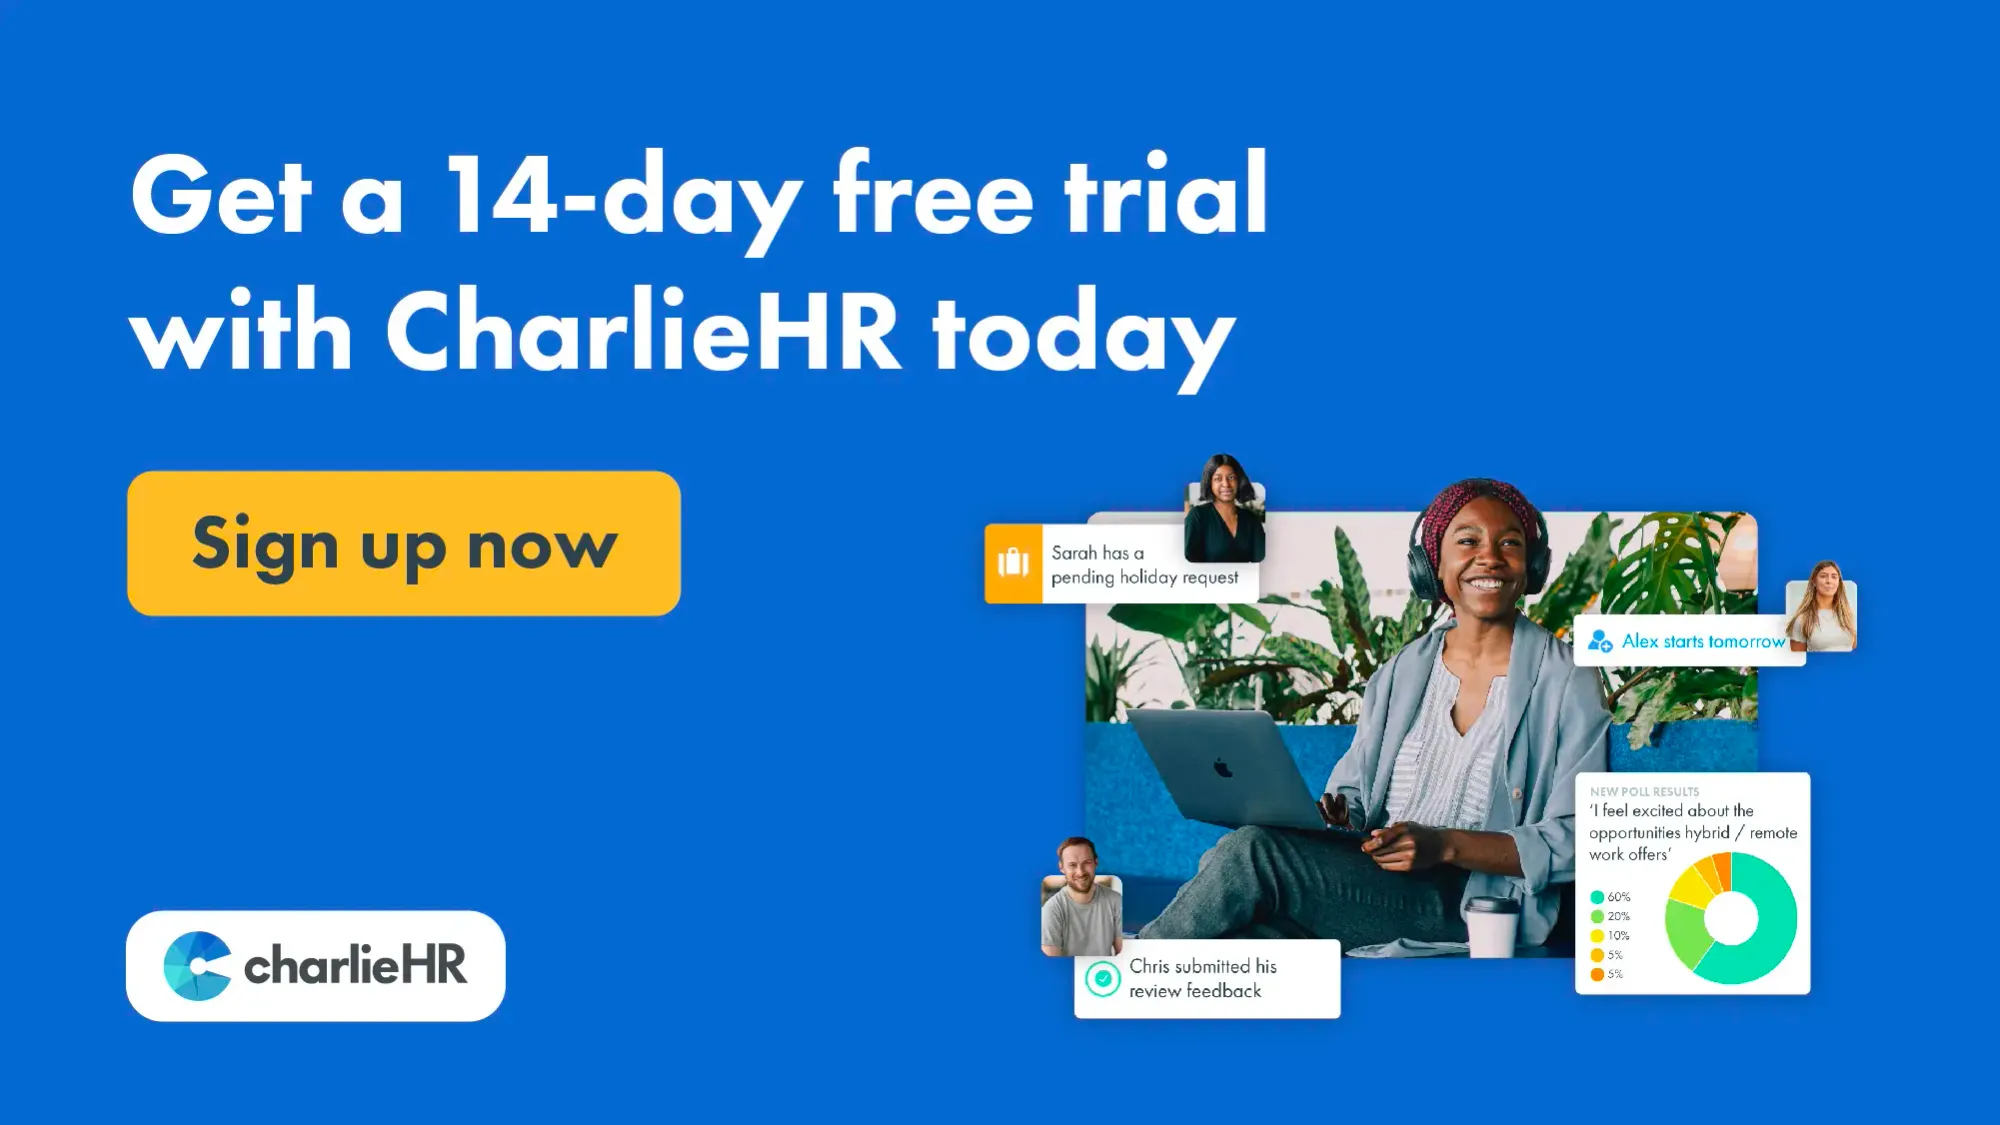 Start you 7 day trial with CharlieHR